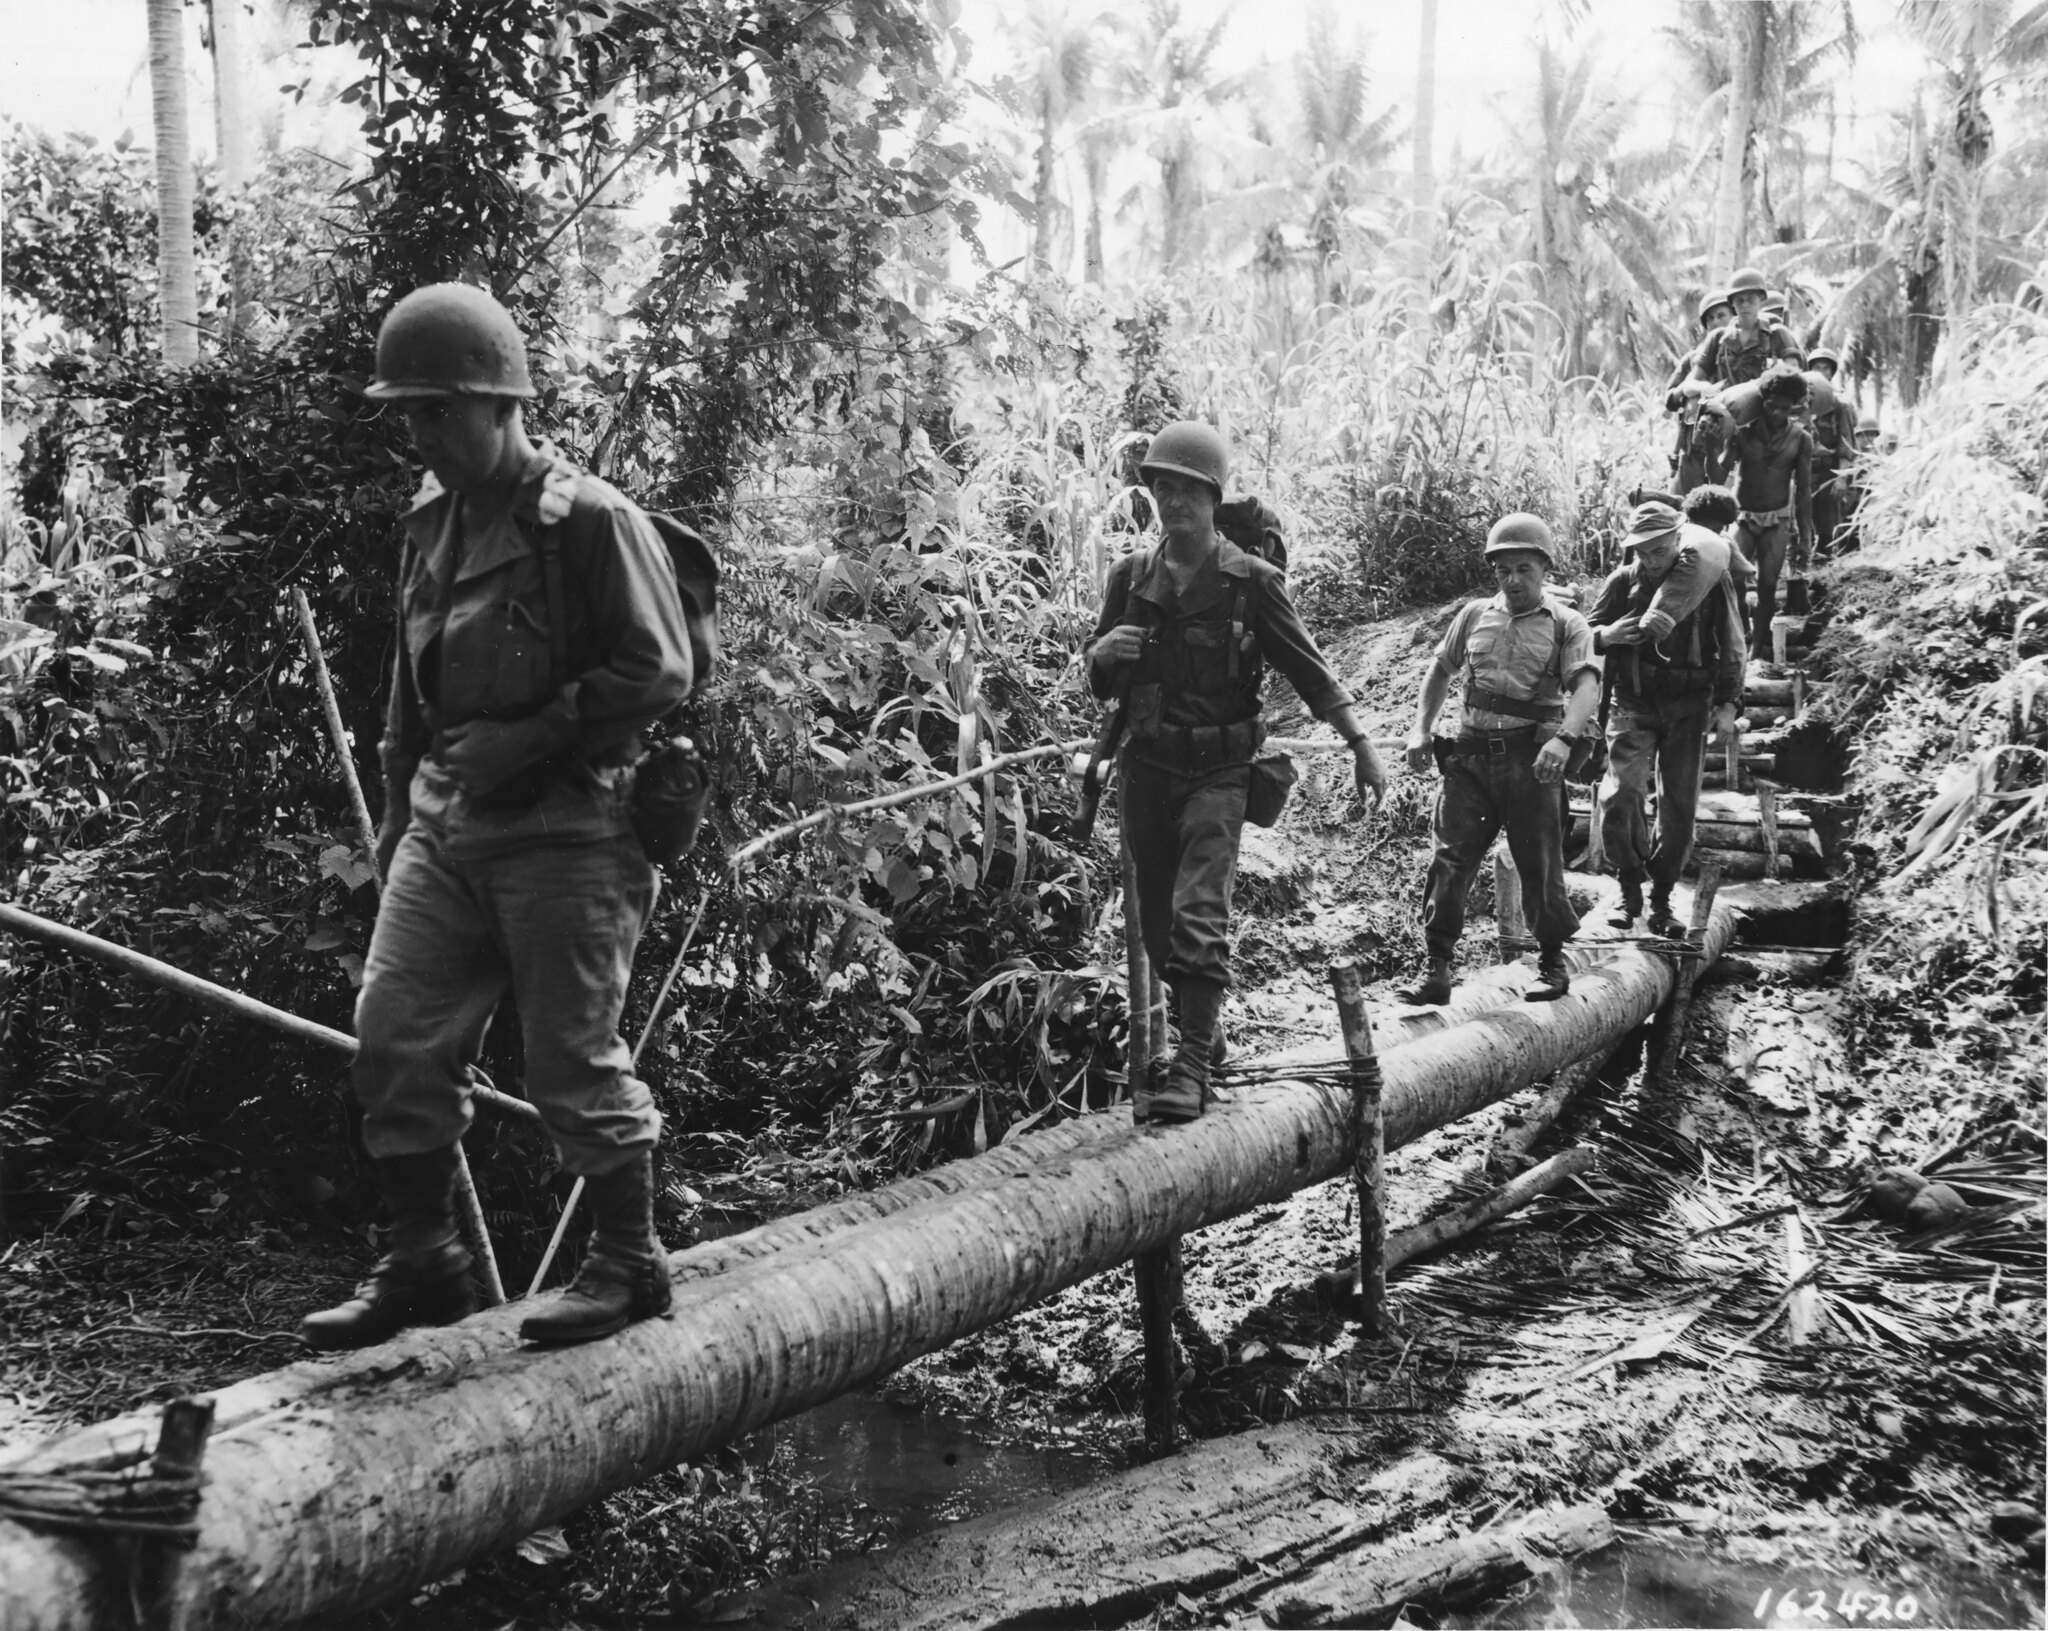 Wisconsin National Guard Soldiers, from the 32nd Division, cross a rudimentary log bridge in the South Pacific in 1942 during World War II.